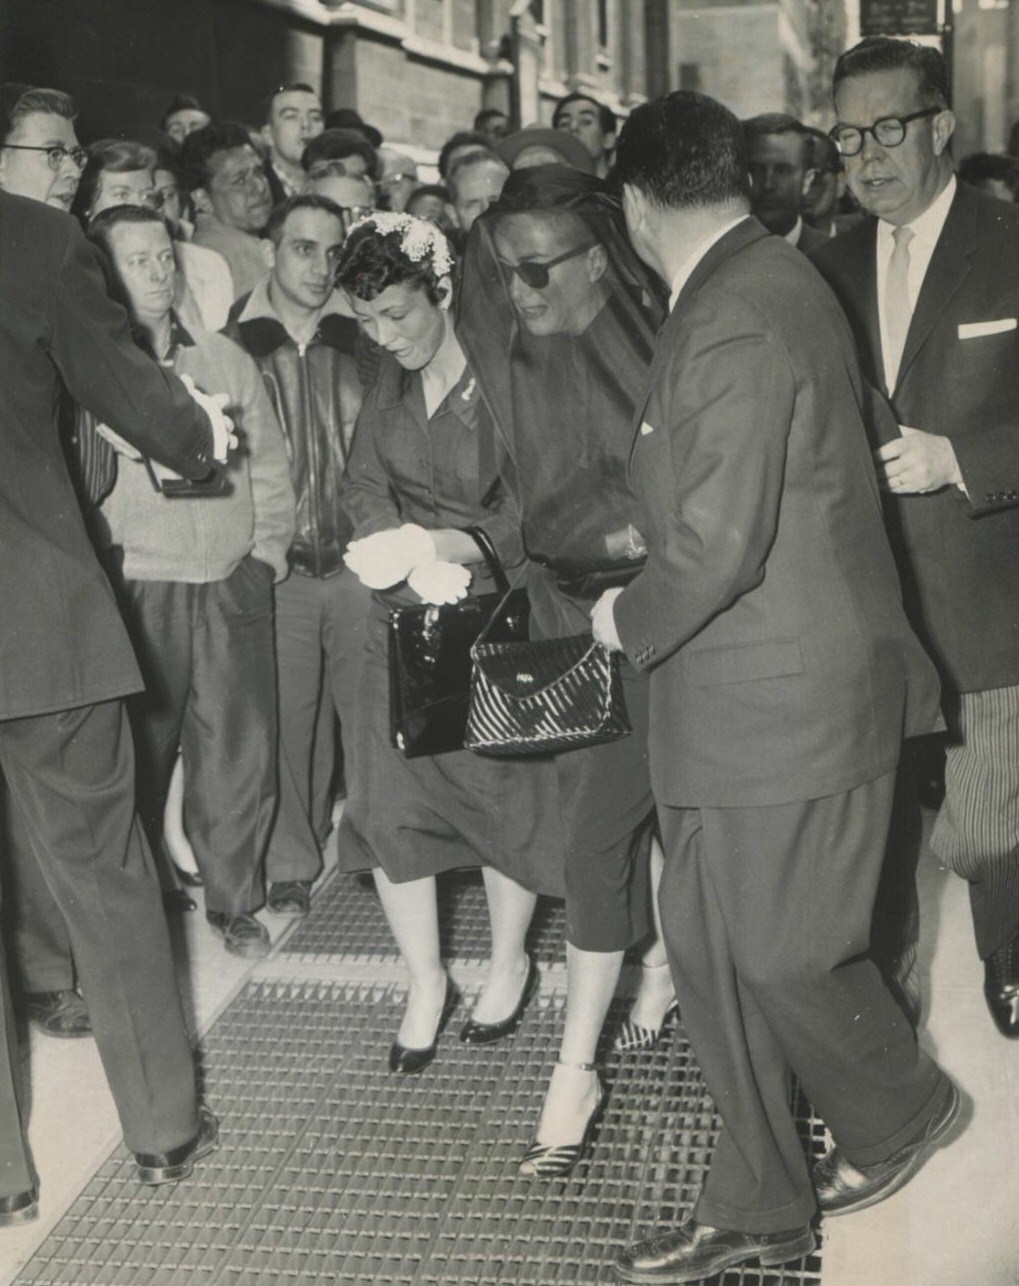 April 22, 1959. At Al Steele's funeral, with Steele's daughter Sally. 